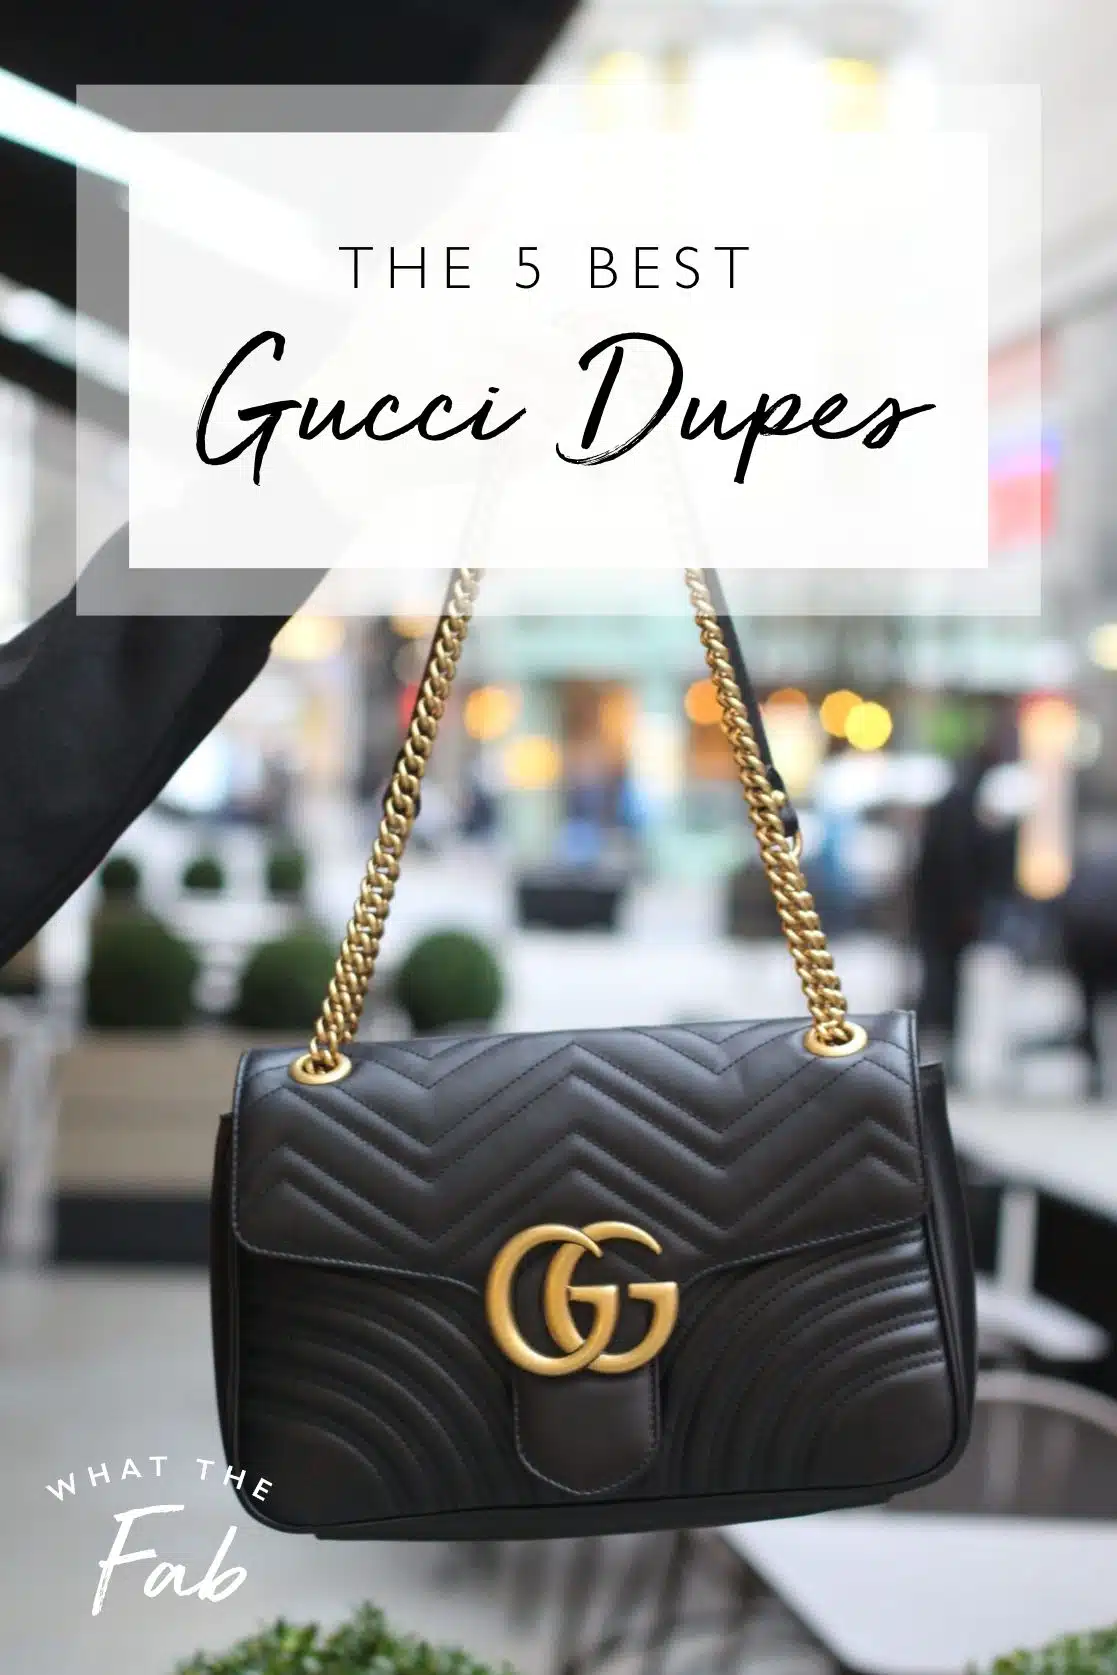 5 Gucci Dupes That Give the Iconic Look (Without the Price Tag)